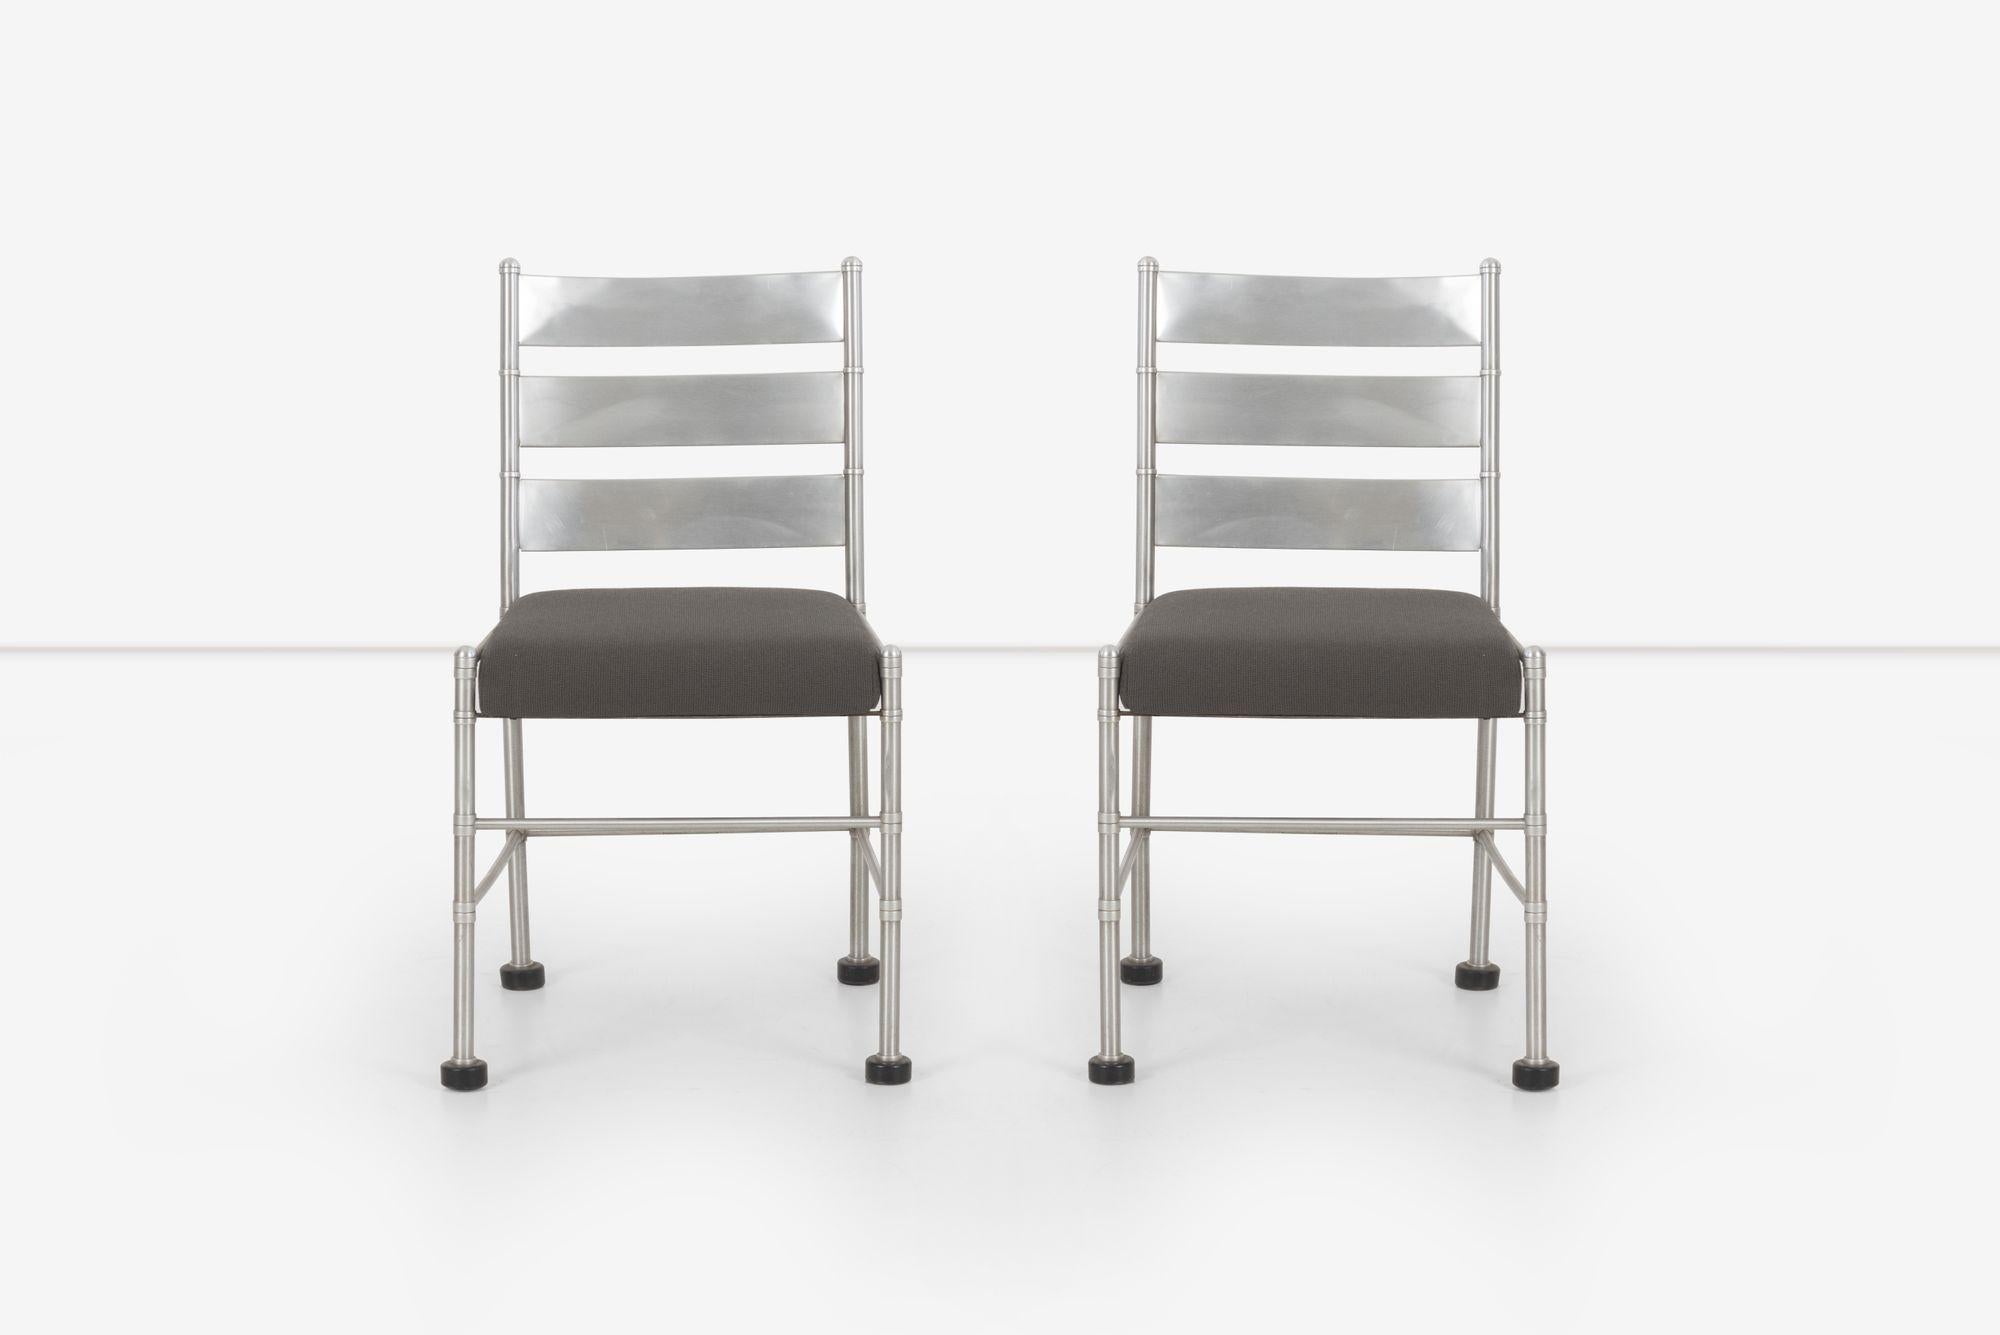 Pair of Warren McArthur pull-up chairs, 1930's Aluminum tubular frame with back-slats.
Manufactured in Rome, New York Decal underside.
We reupholstered with new Iron Cloth, a polyester wool-like fabric.
 
Measure: Seat height: 19